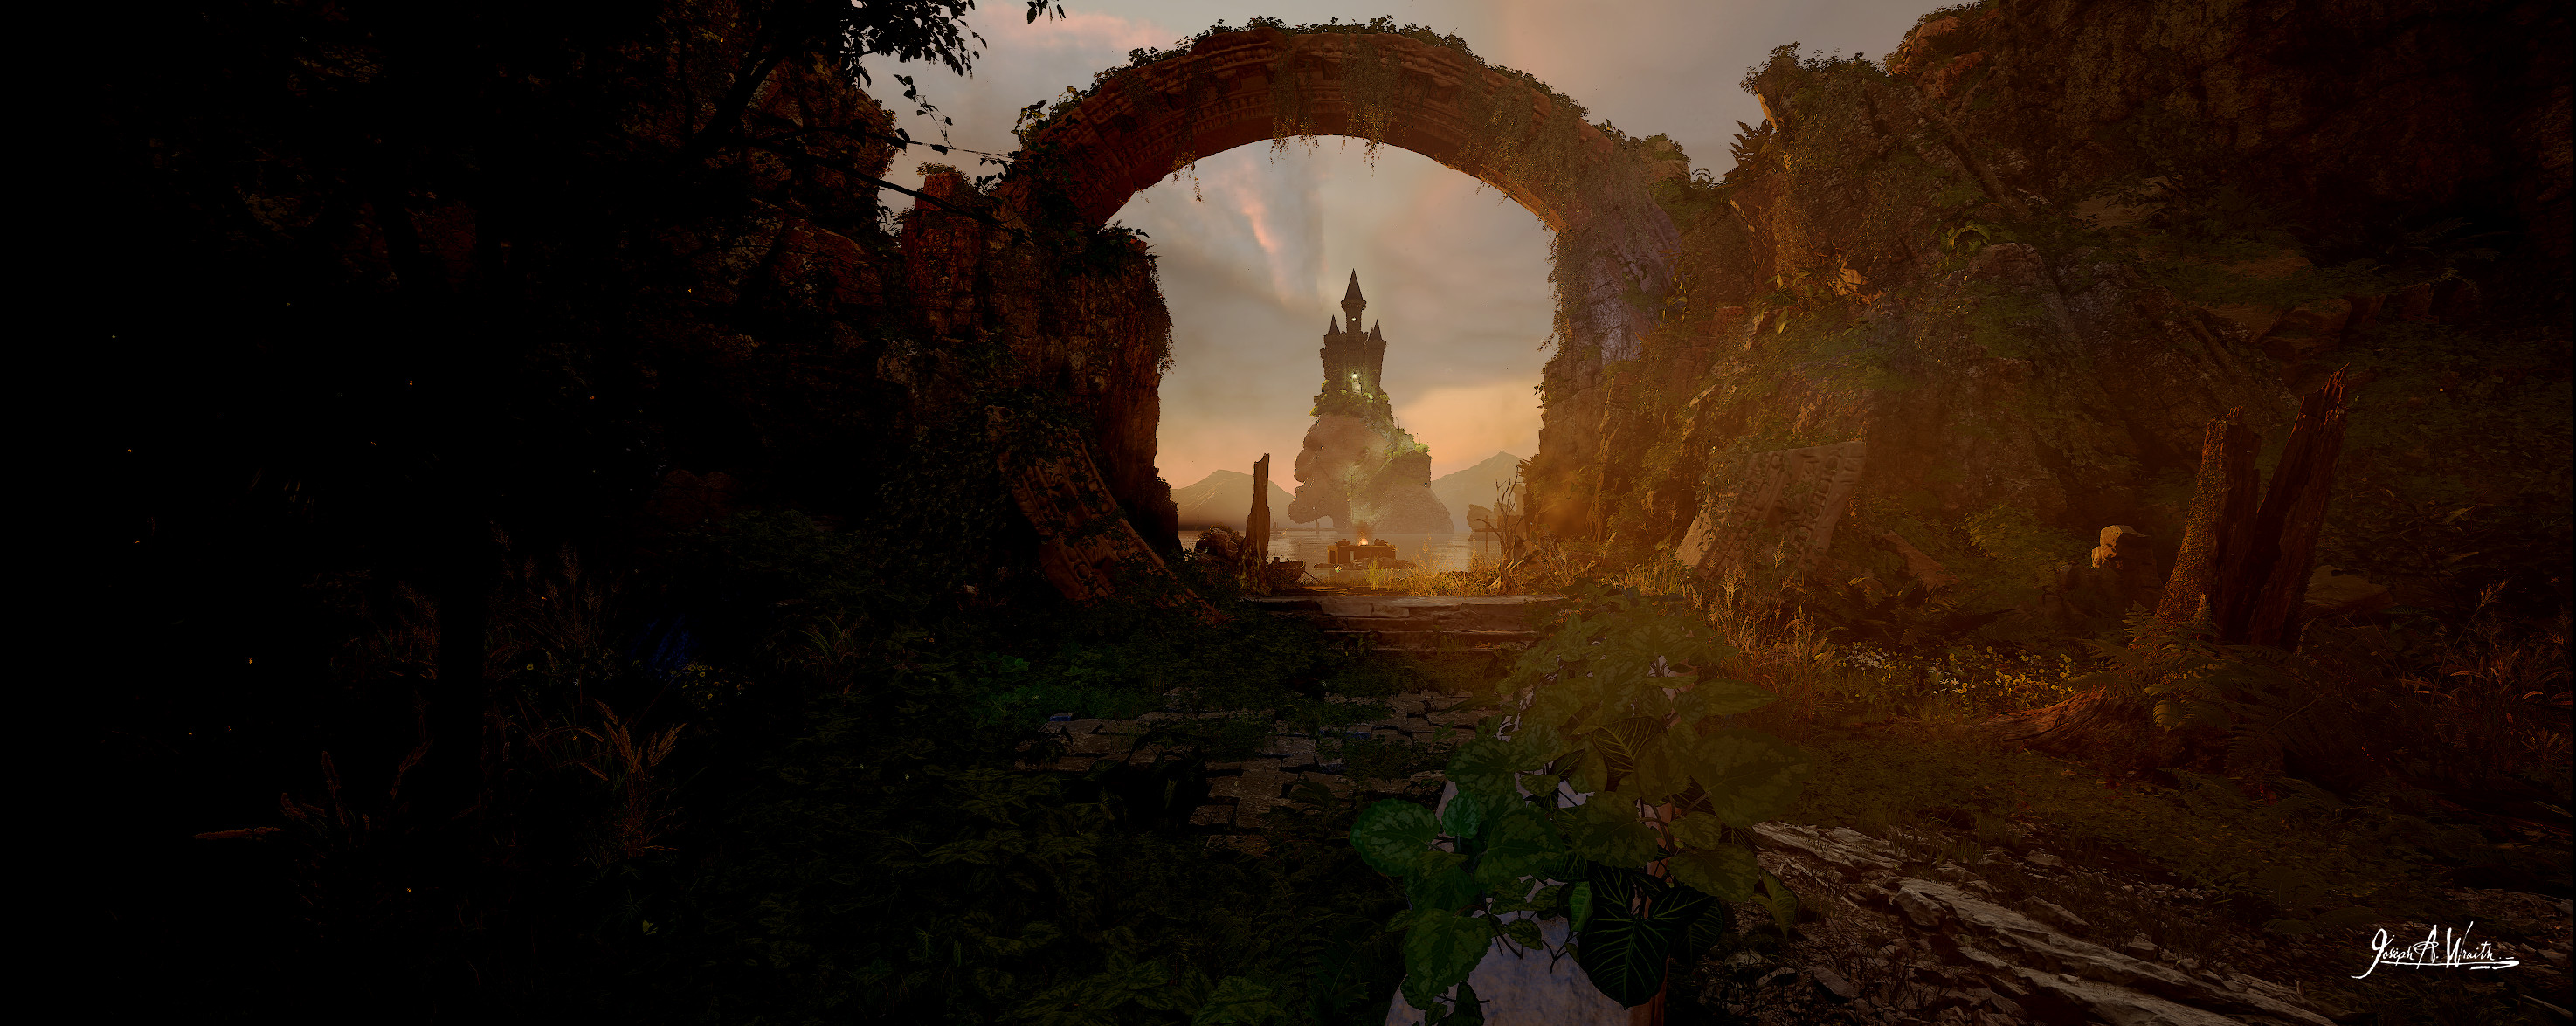 Welcome to Castle-head Bay - Cinematic Screenshot from Unreal.